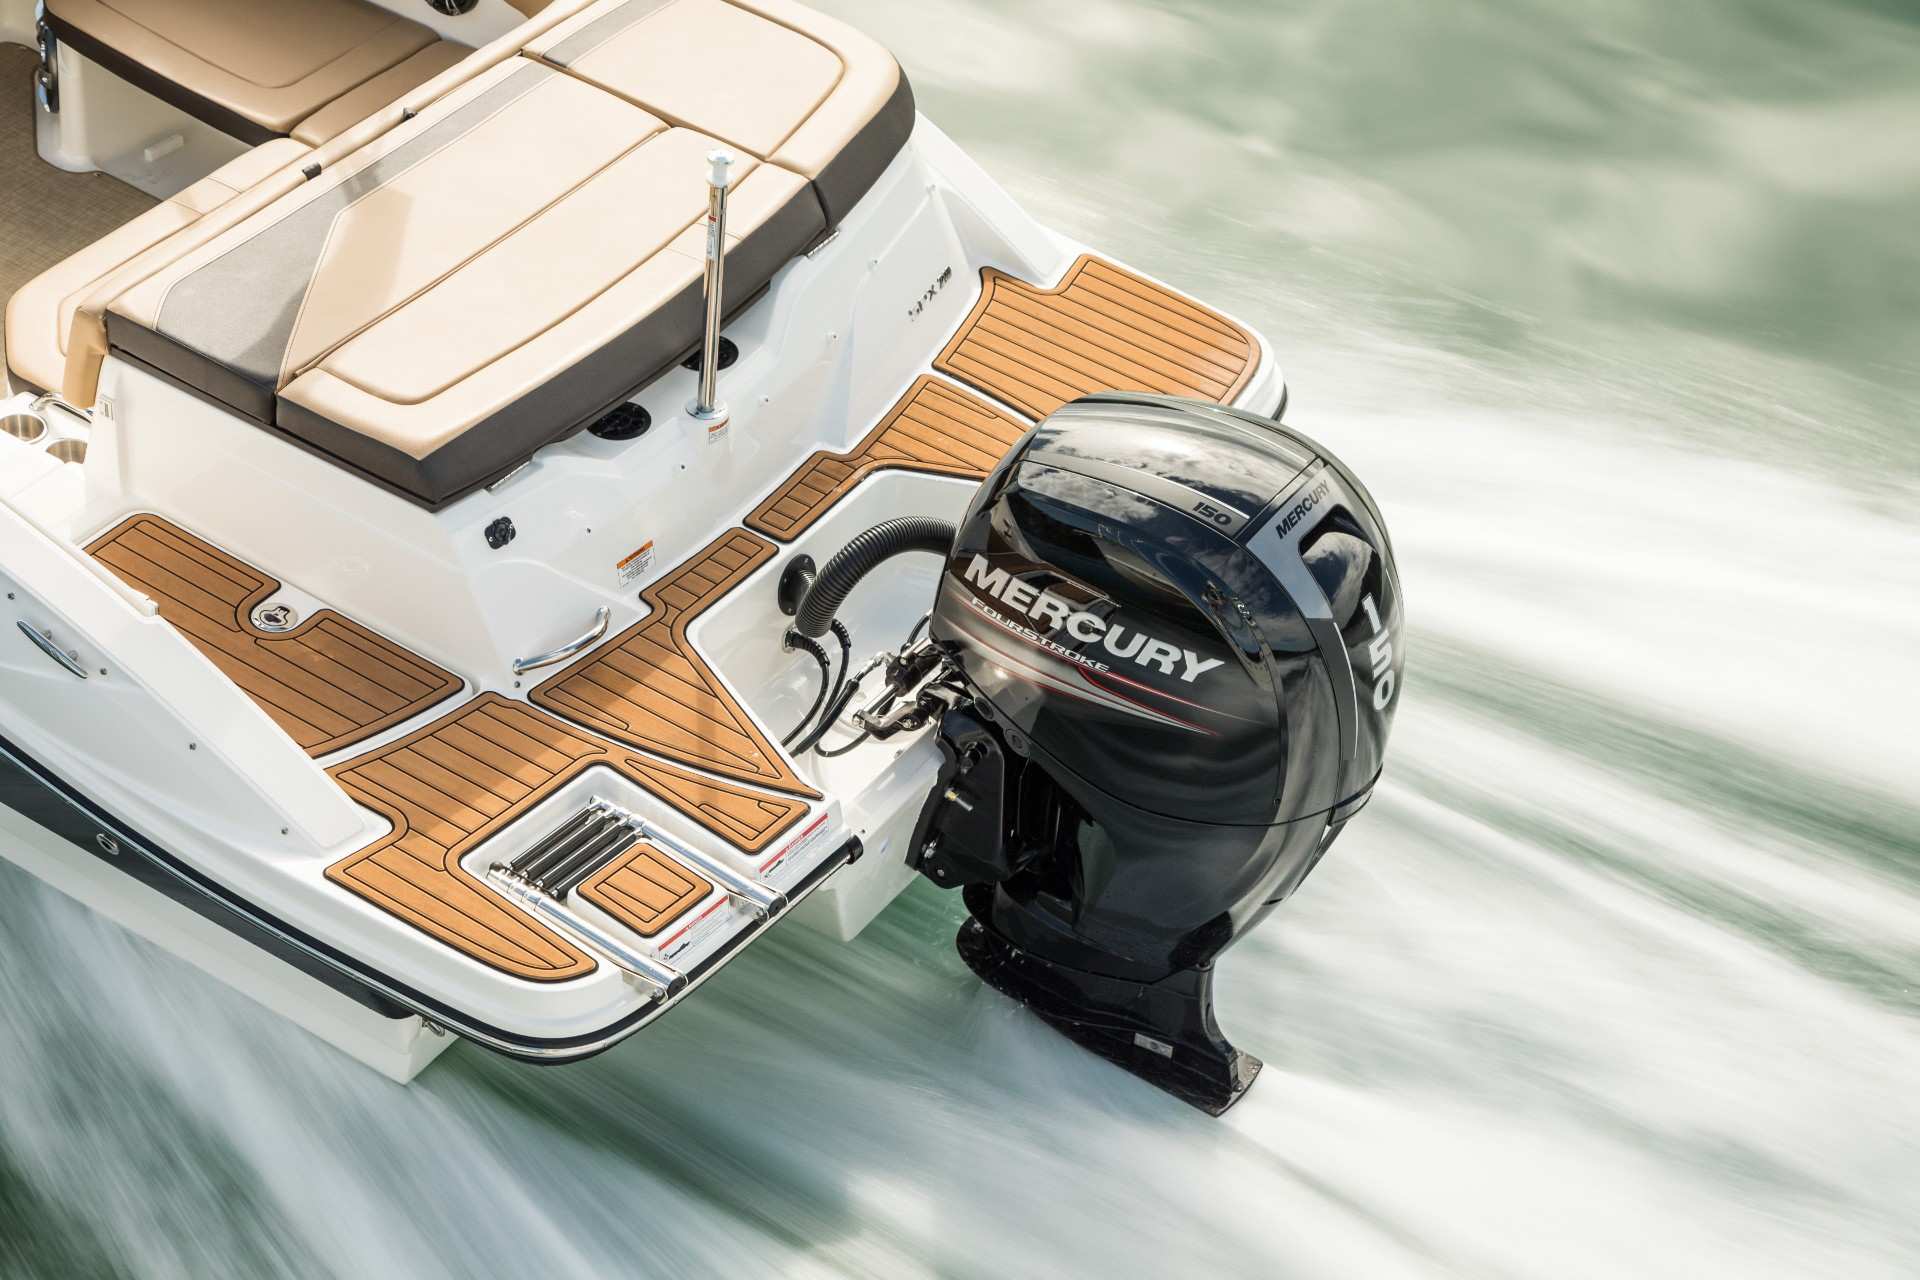 SPX 210 Outboard running engine